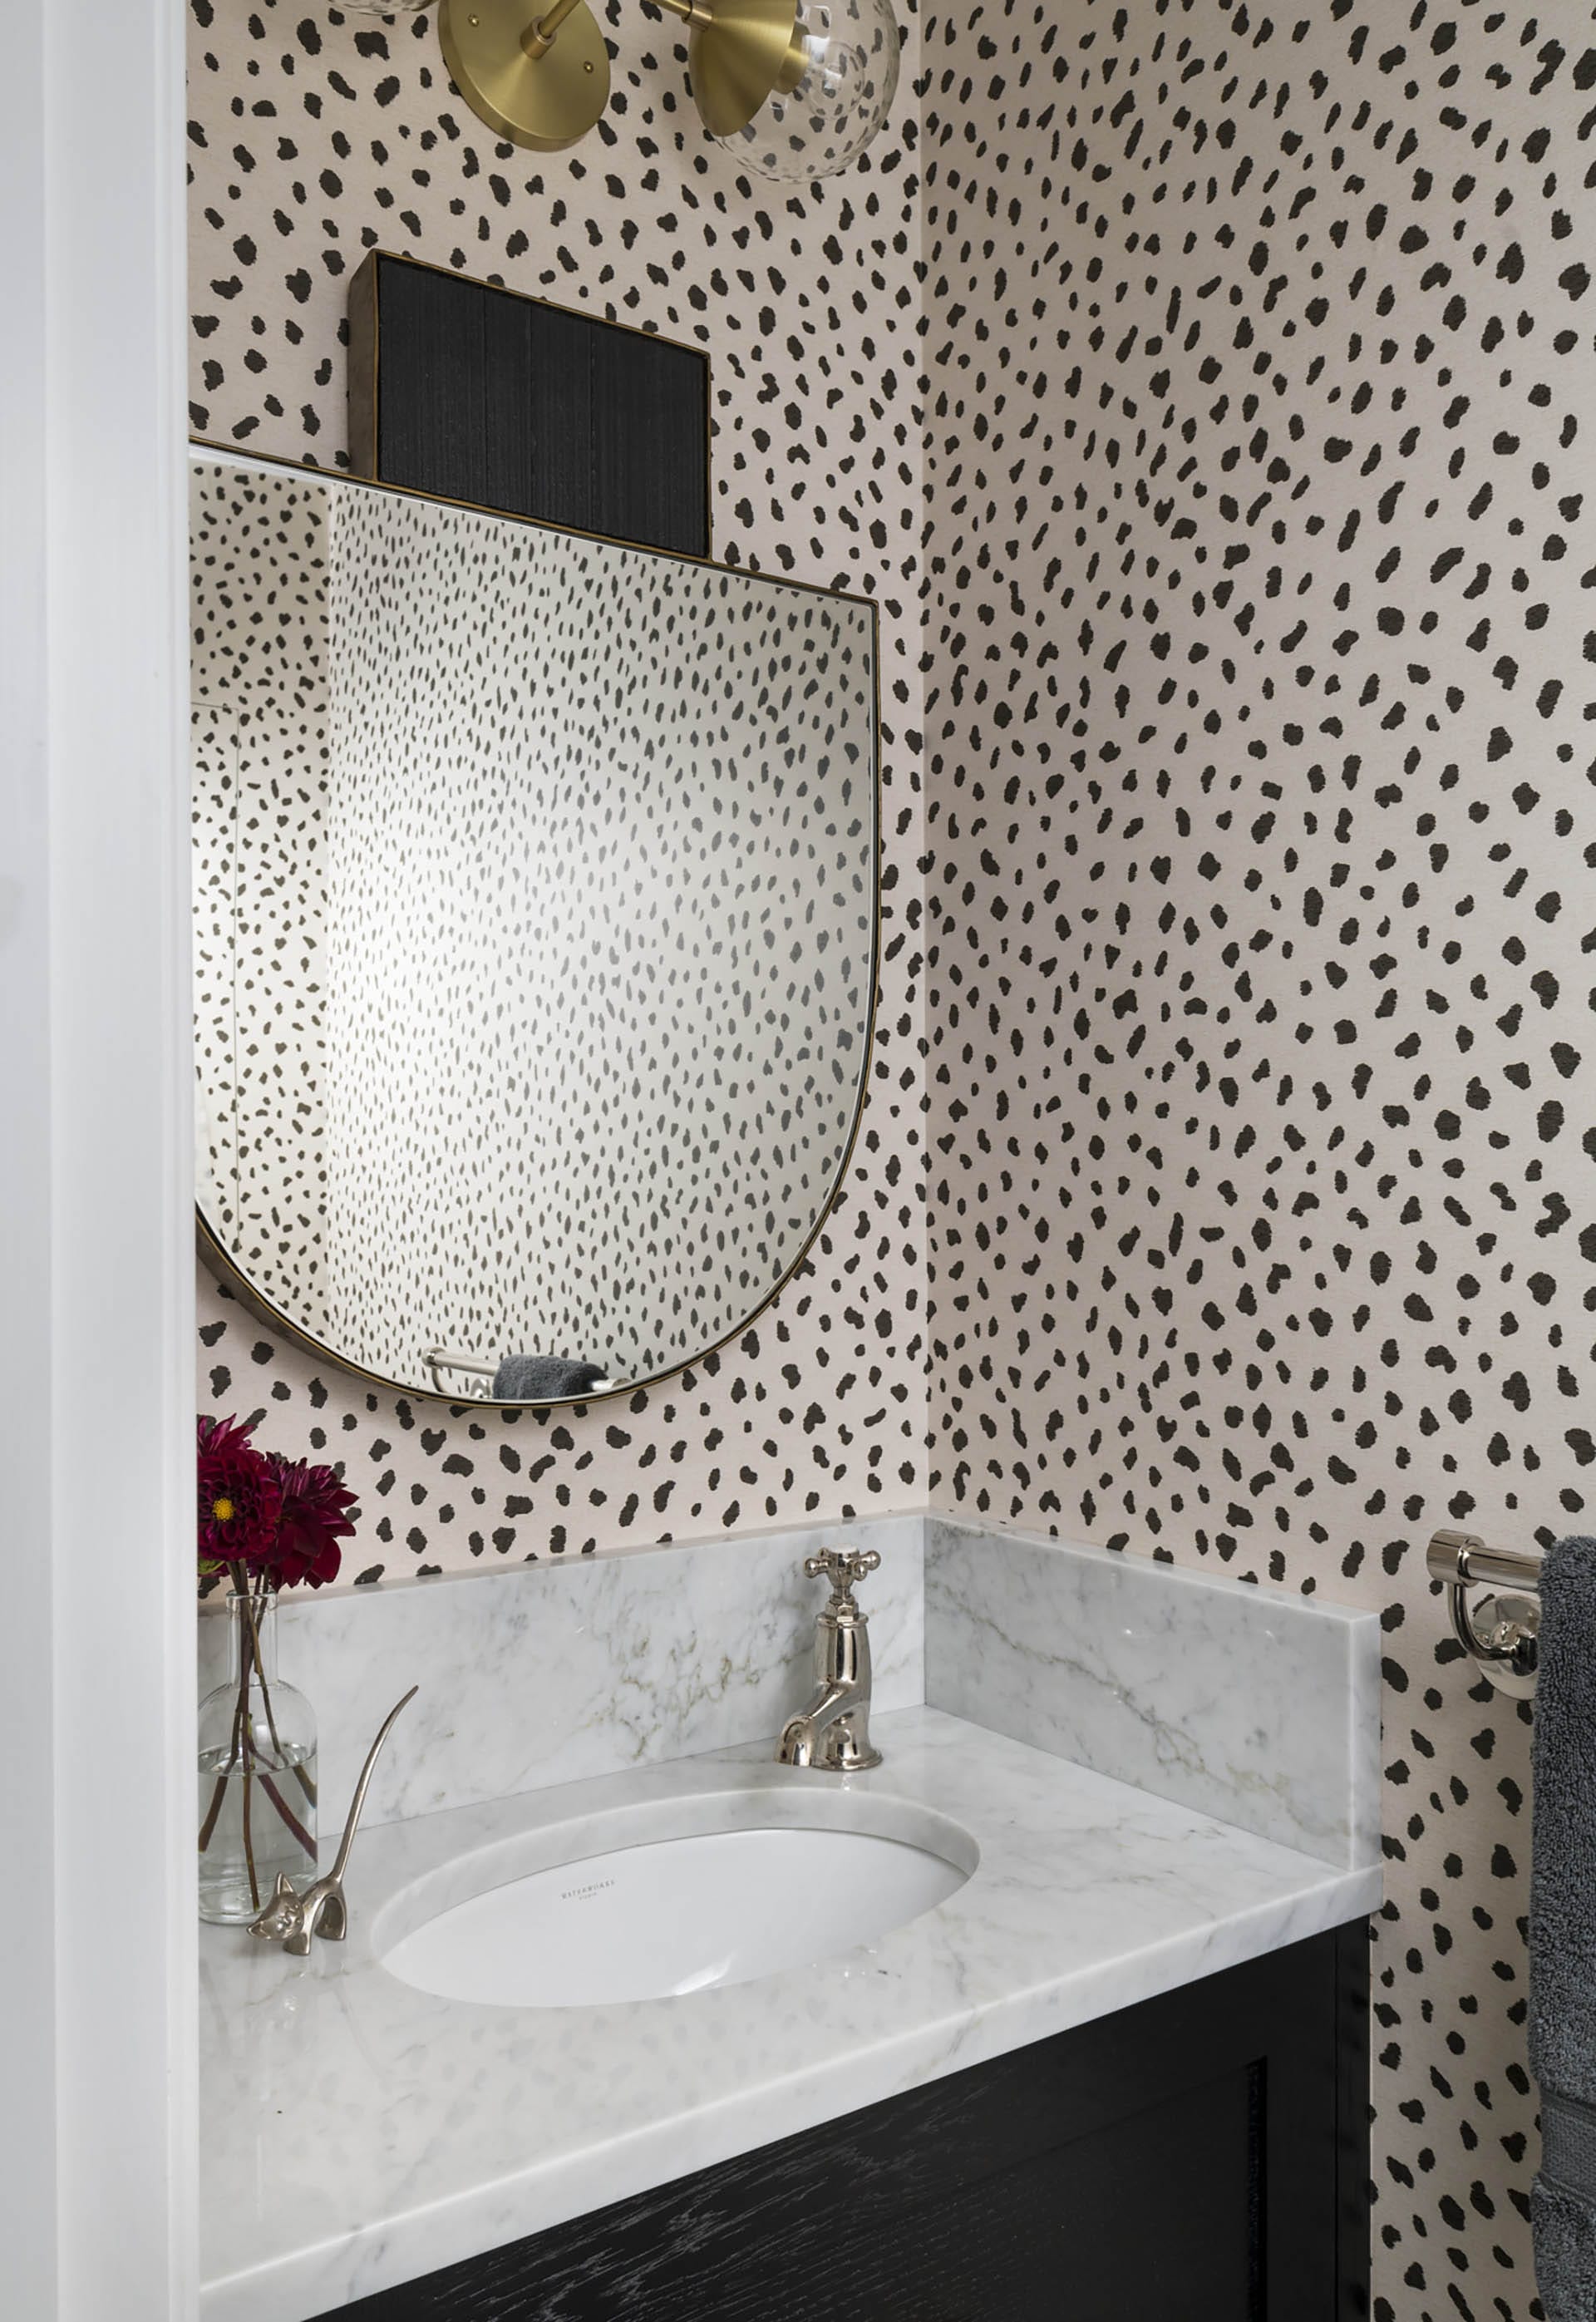 Brooklyn Heights powder room with organic spotted wallpaper, a marble countertop, and statement mirror